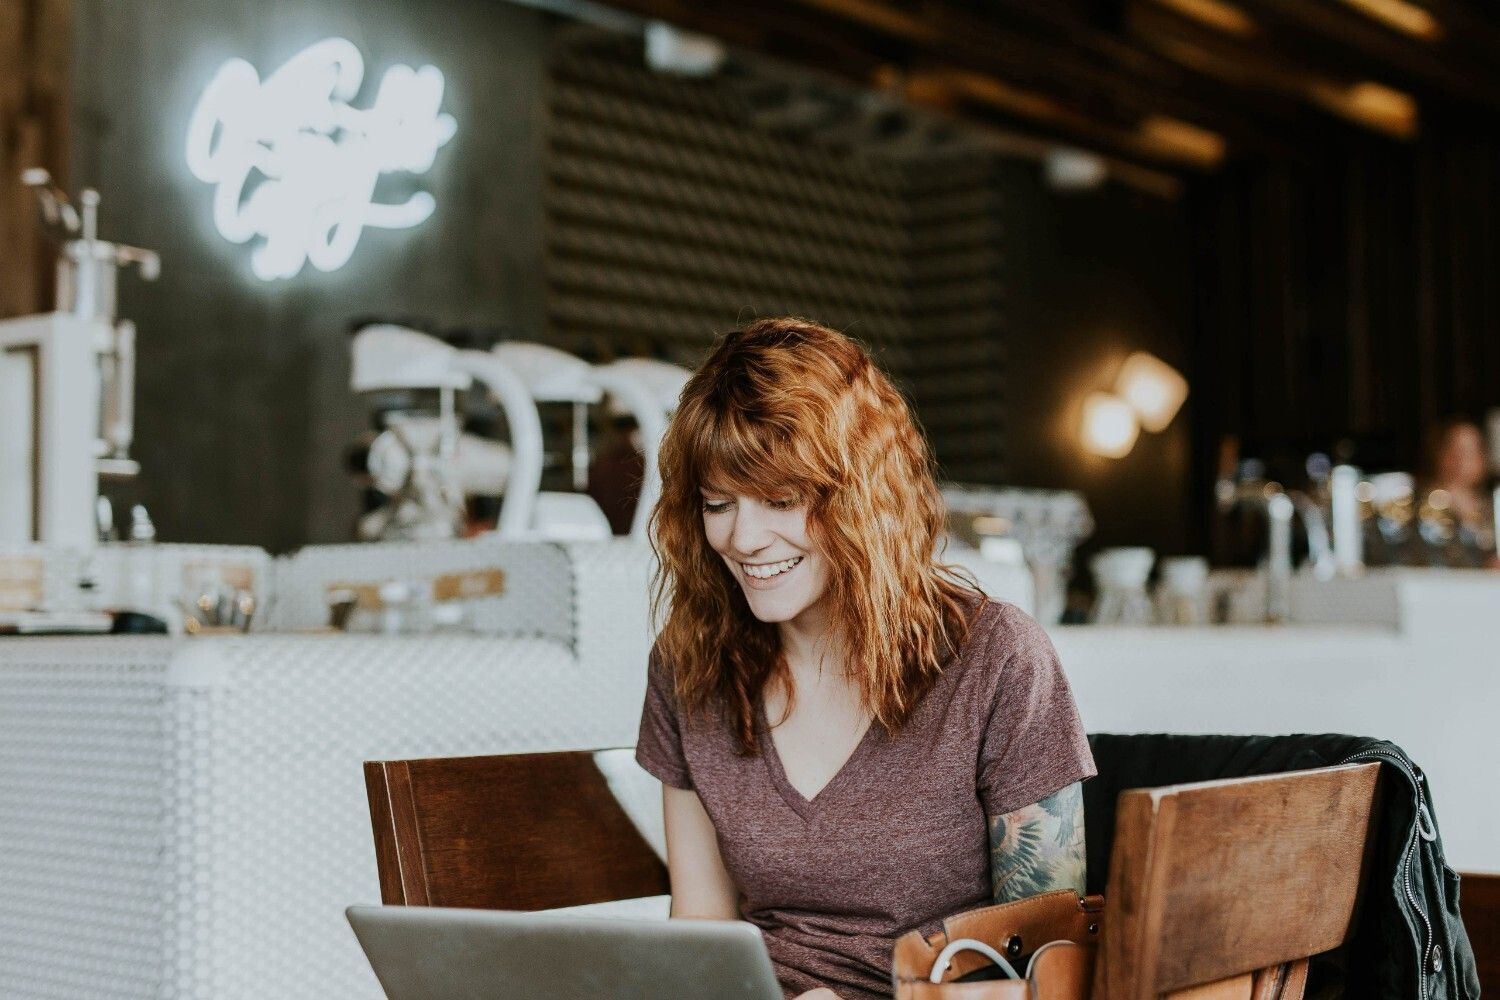 Employee satisfaction increases with good human resources departments. This image shows a redheaded woman smiling at her laptop.